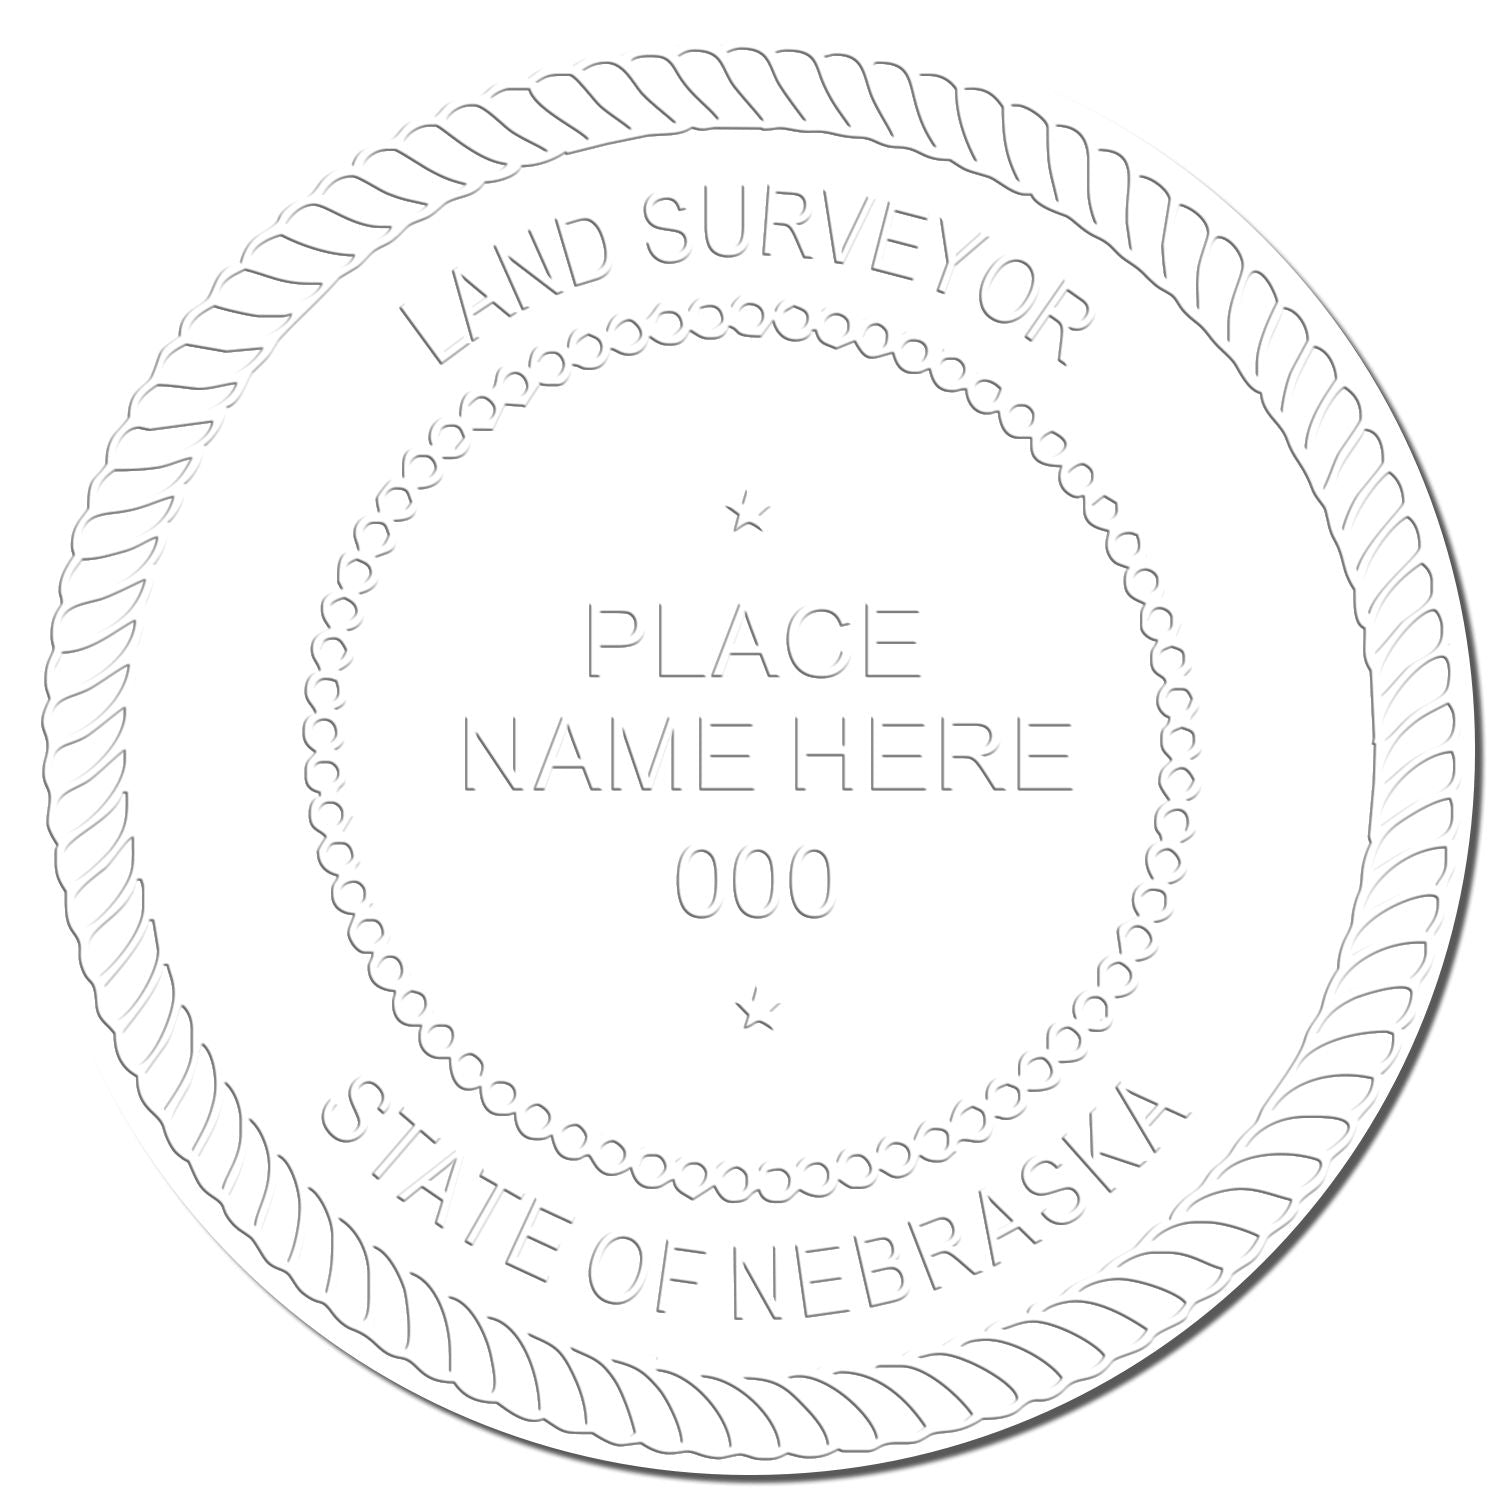 This paper is stamped with a sample imprint of the Heavy Duty Cast Iron Nebraska Land Surveyor Seal Embosser, signifying its quality and reliability.